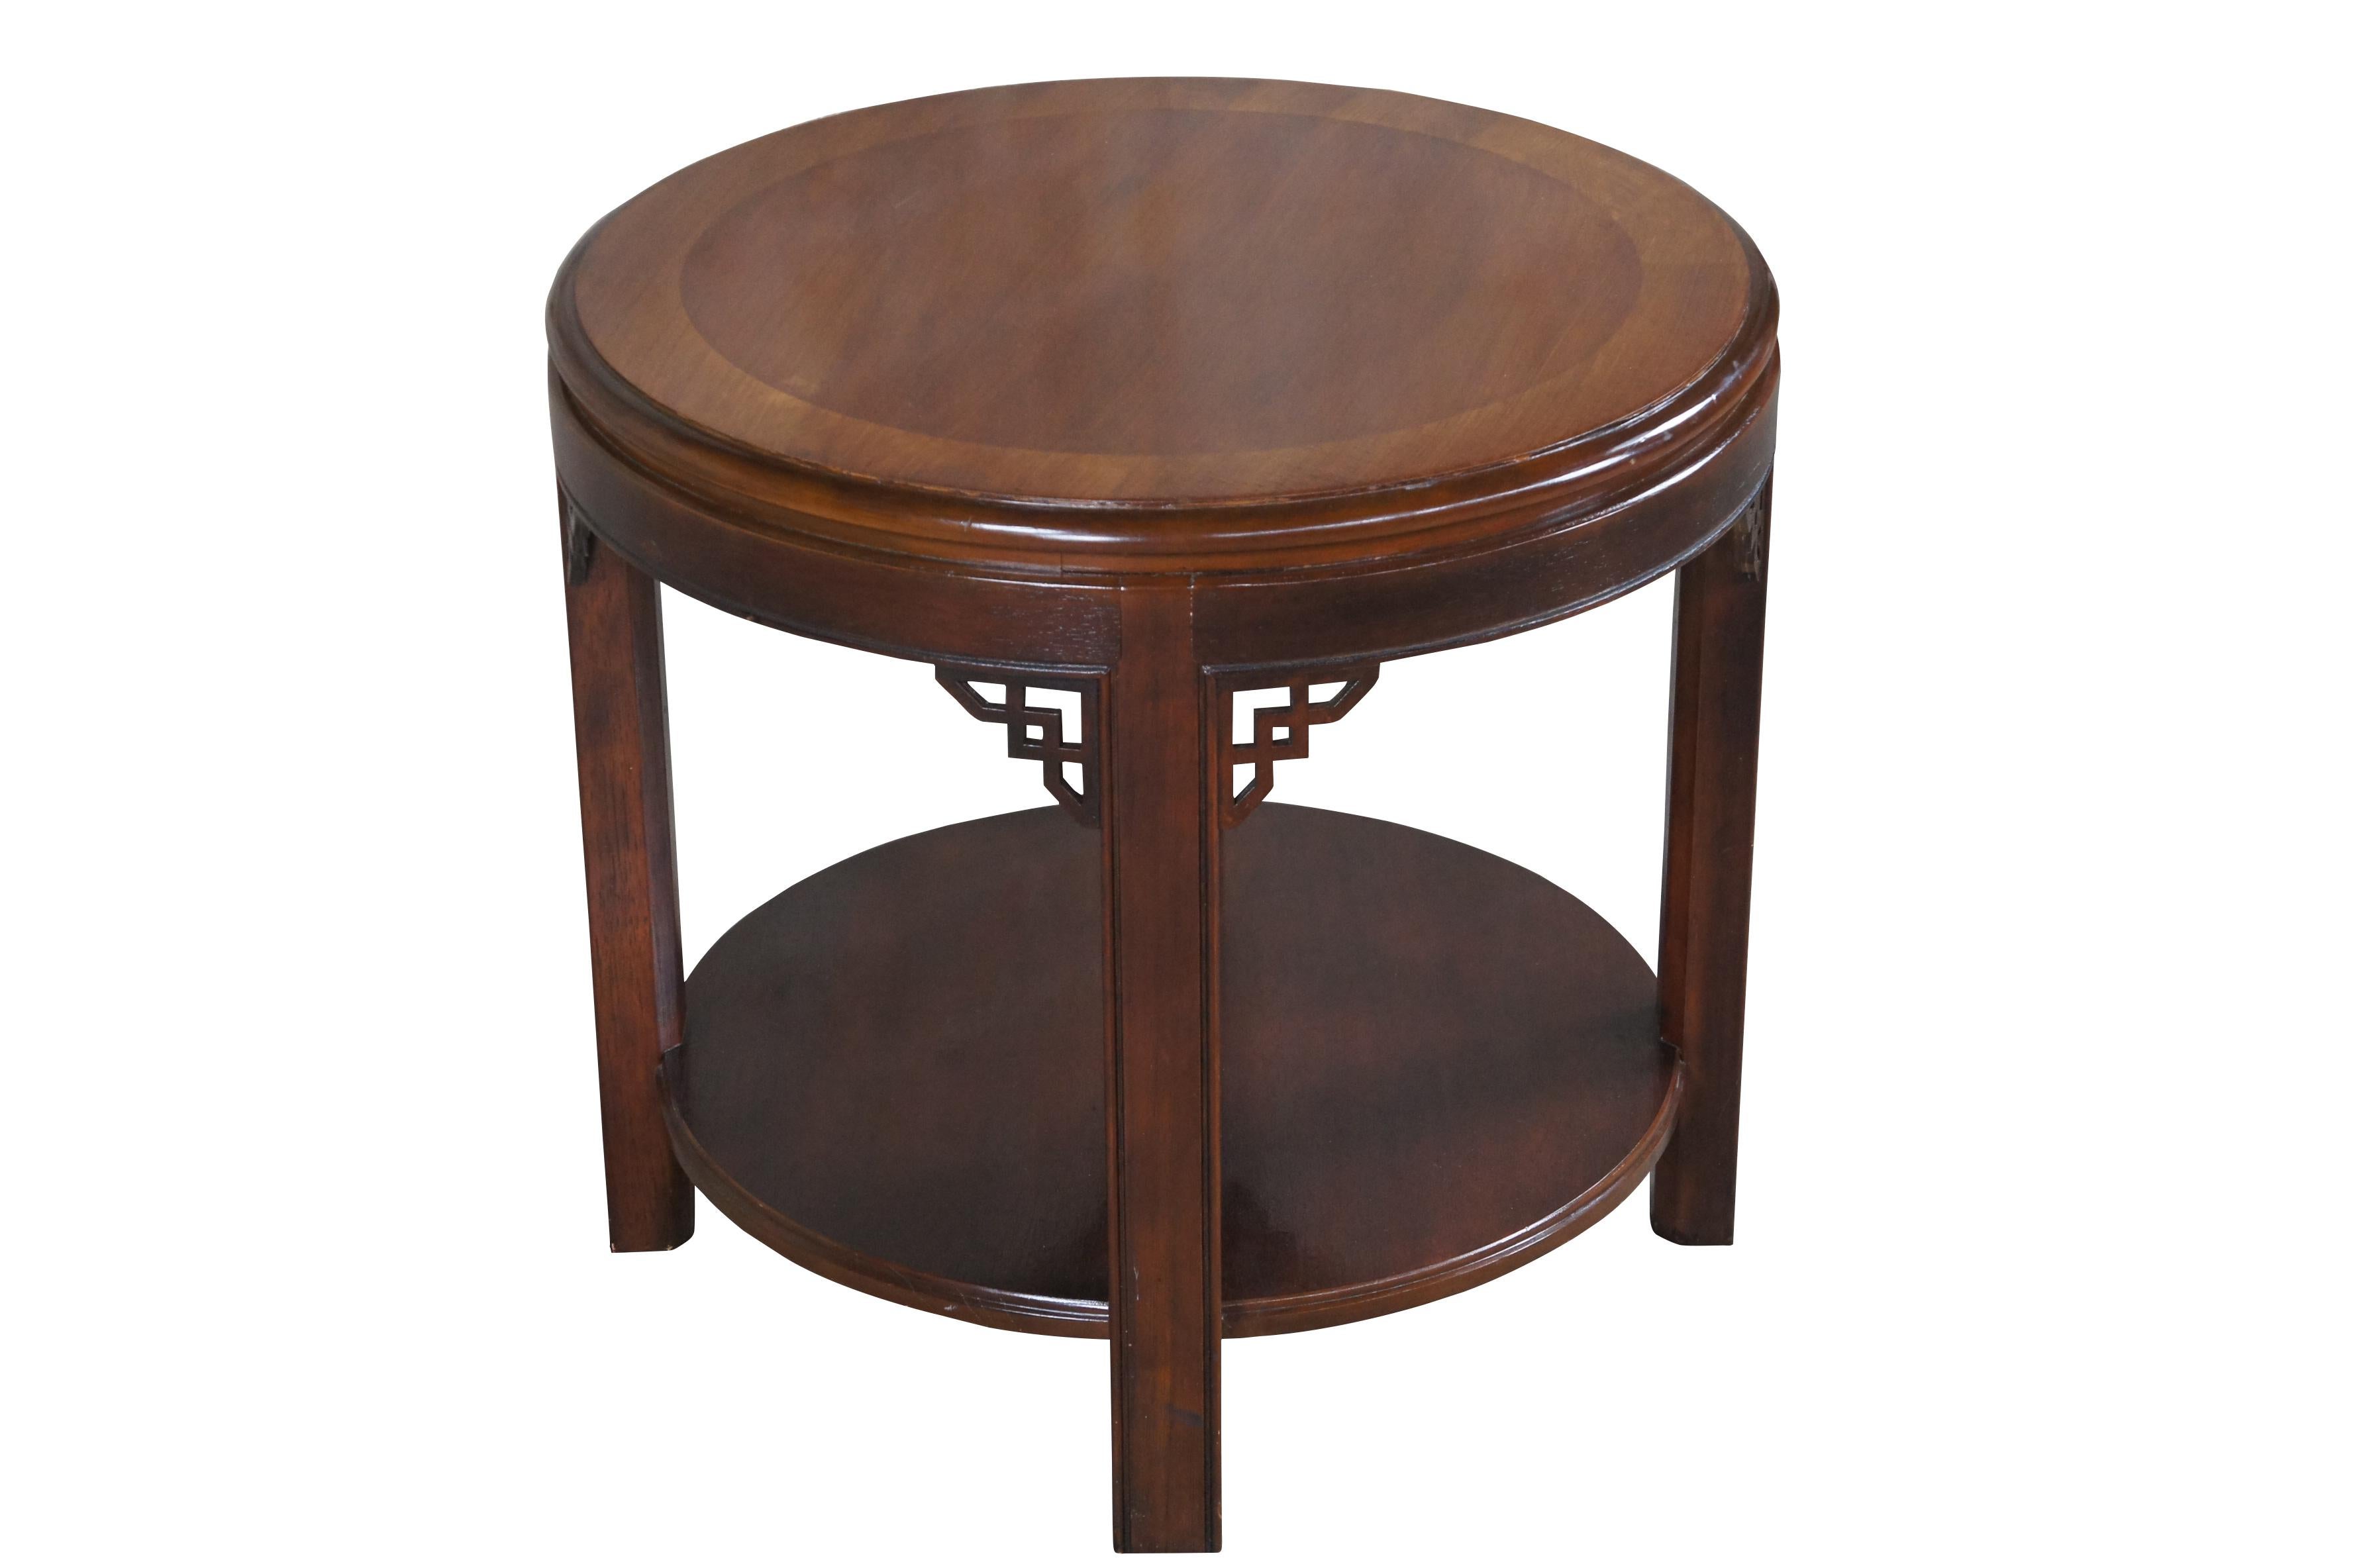 Vintage Drexel Heritage side accent table.  Made of mahogany featuring round form with two tiers, Chippendale styling and fretwork.  Circa 1986.

Dimensions:
24